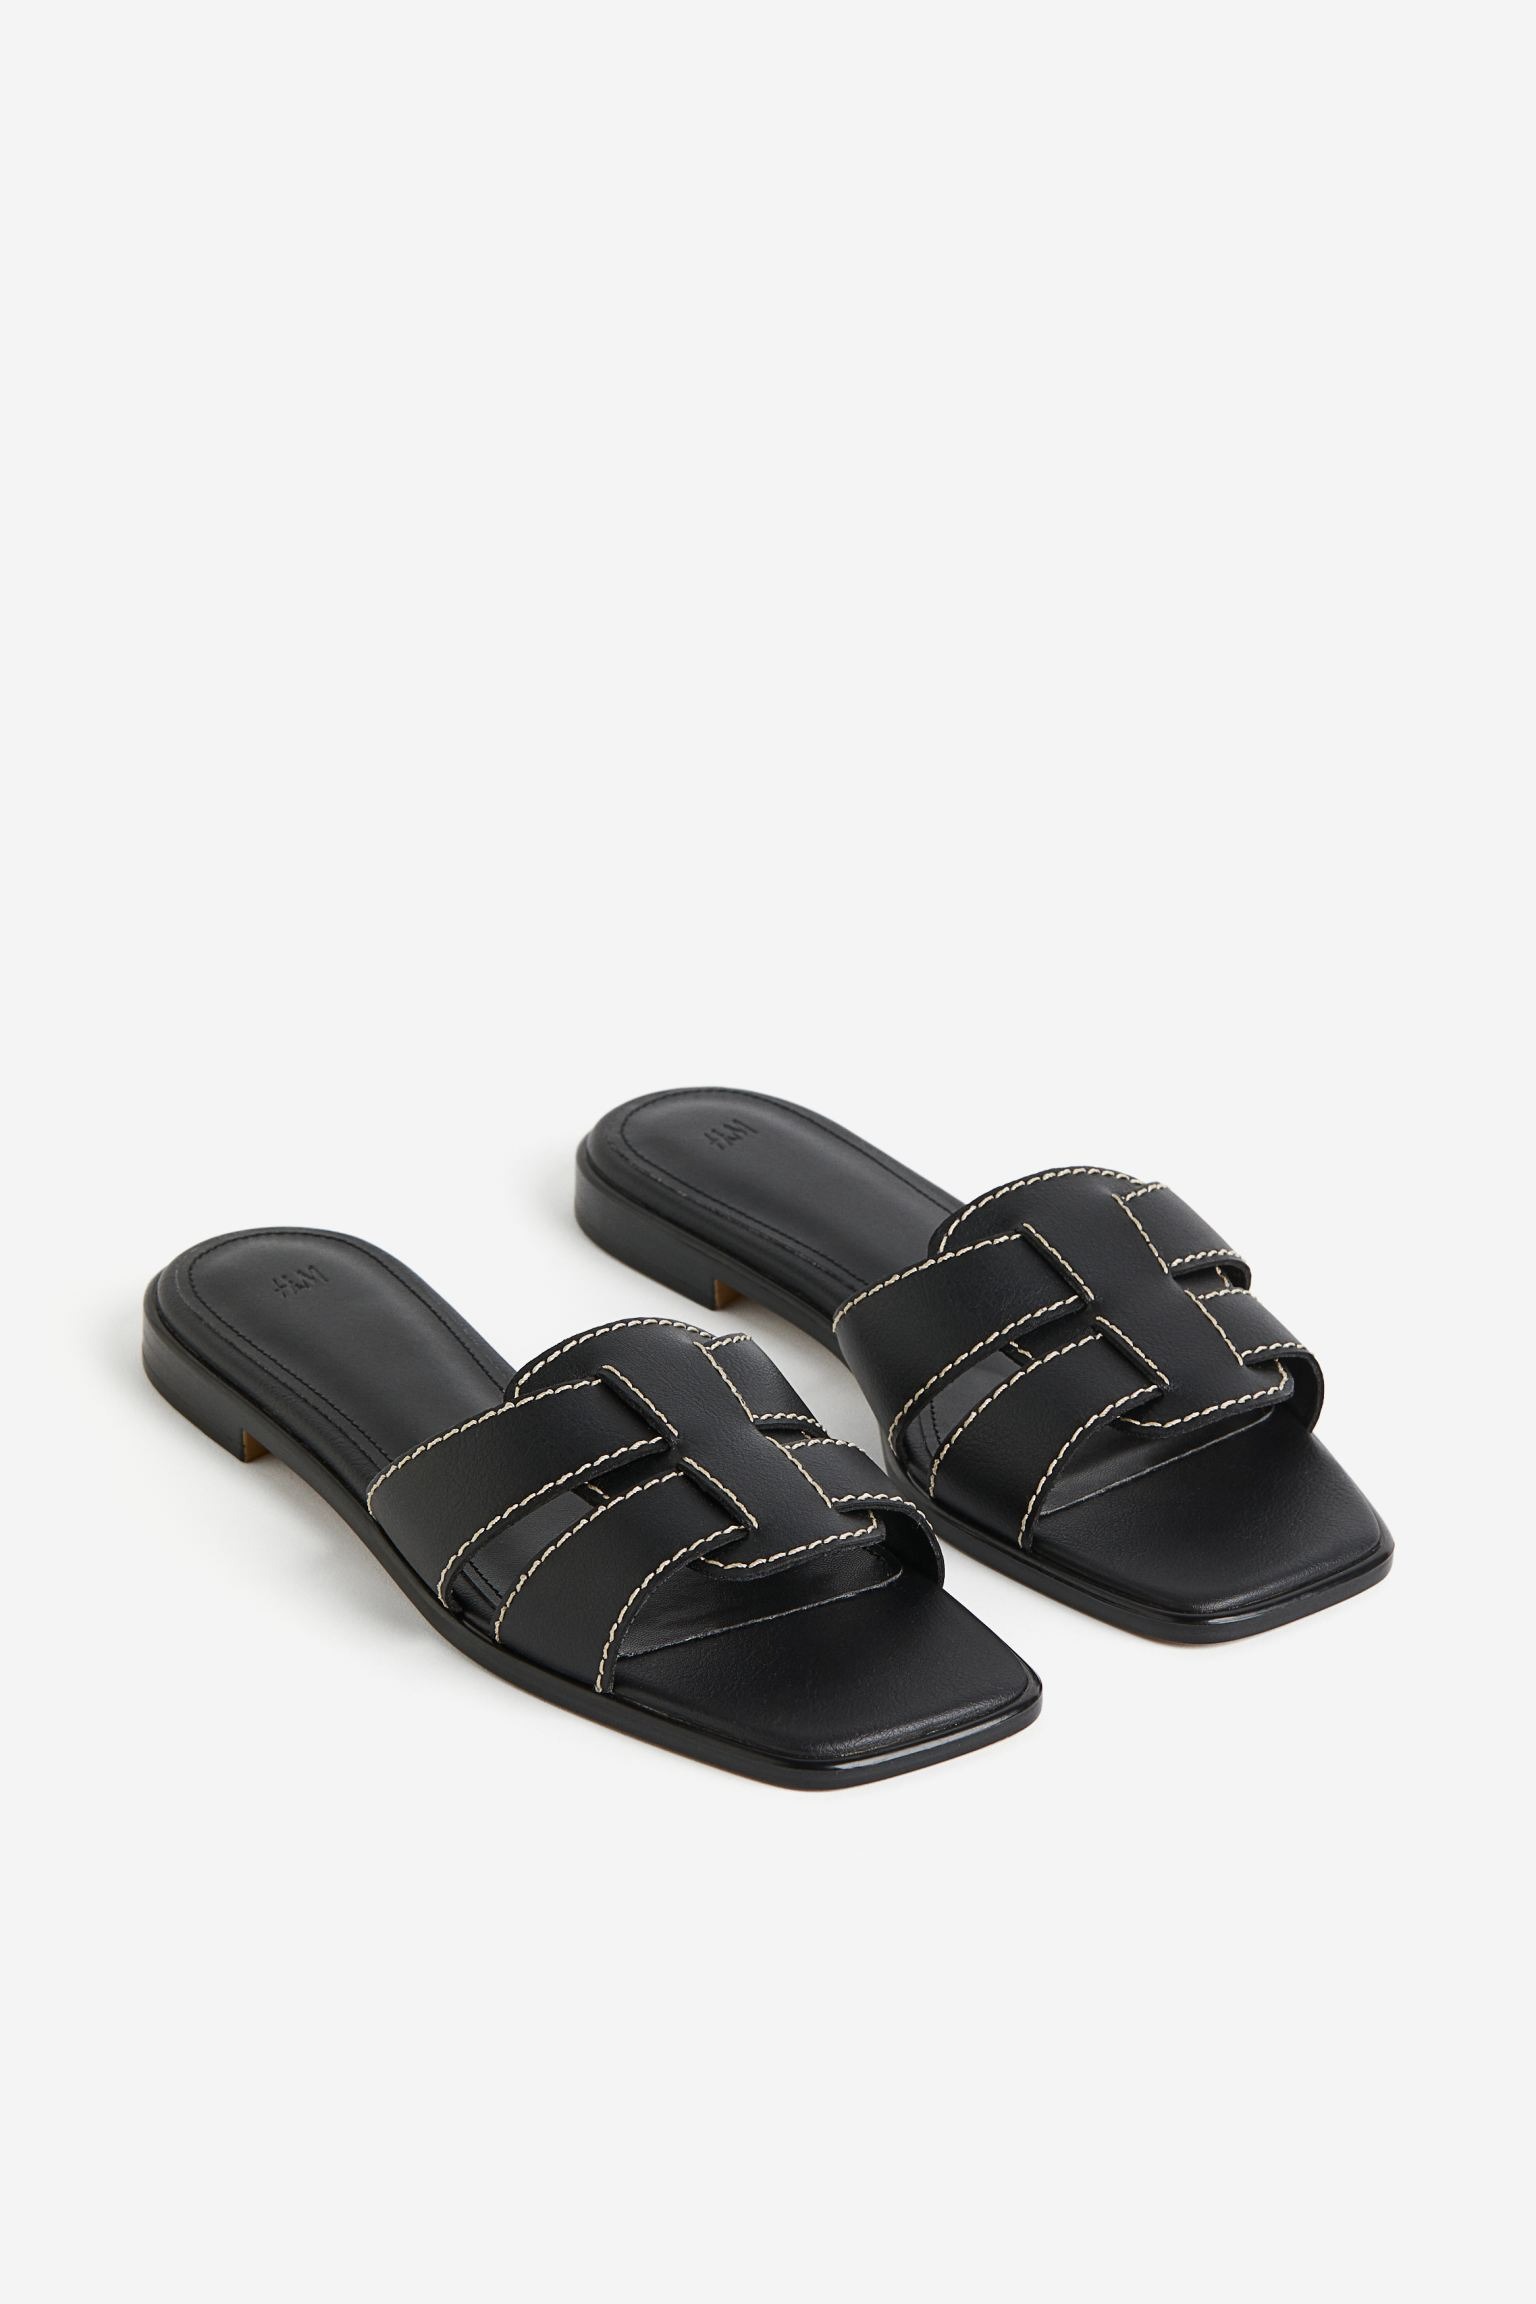 Black flat H&M sandals with white stitching